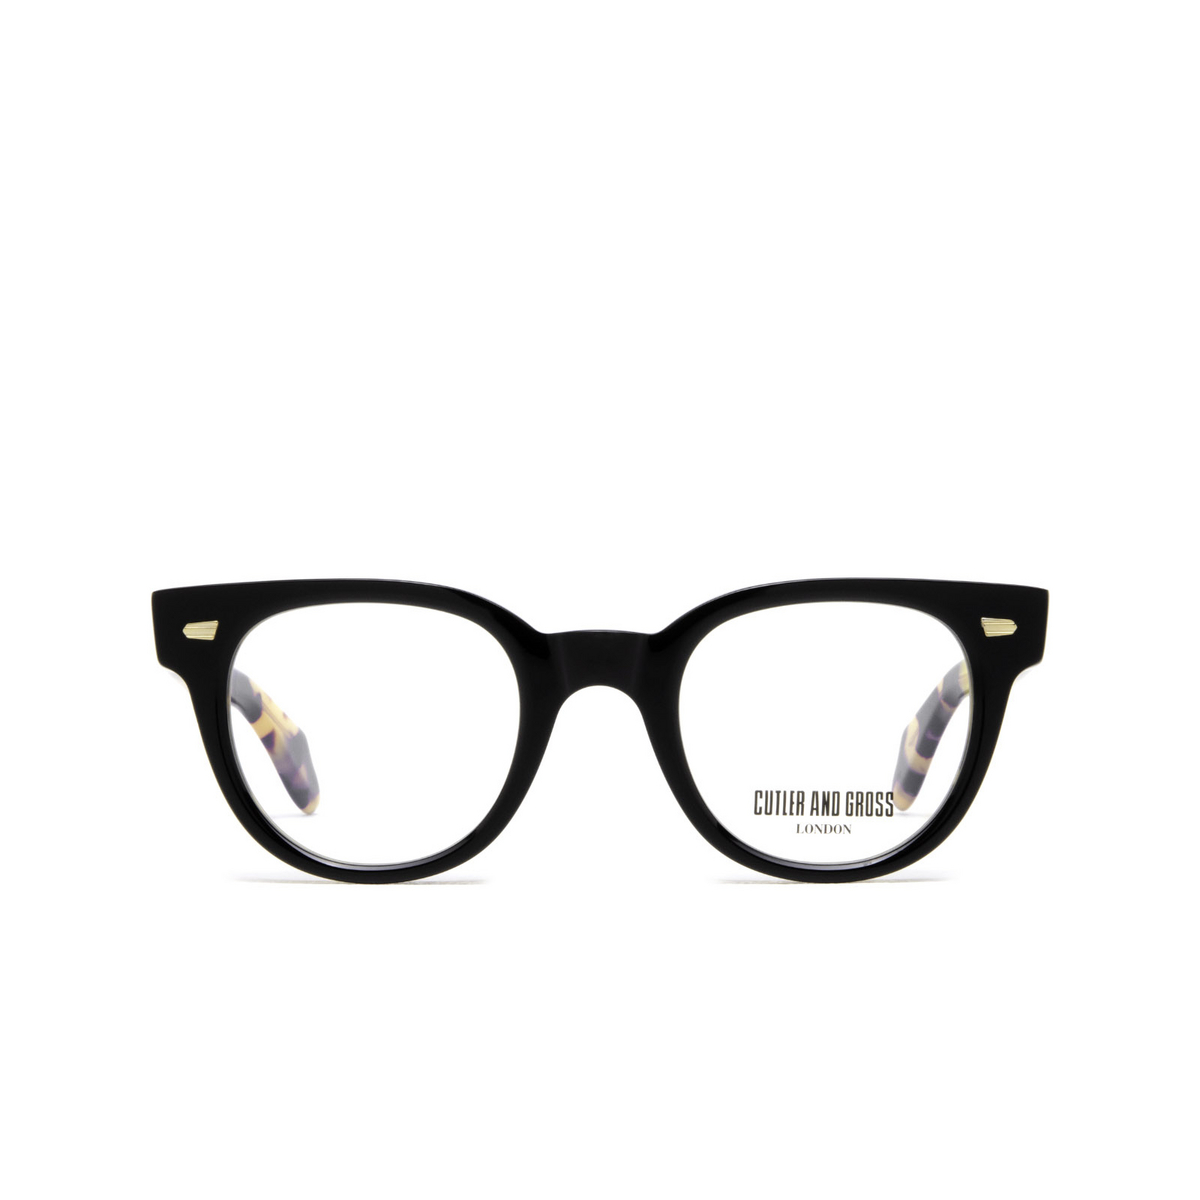 Cutler and Gross® Round Eyeglasses: 1392 color Black On Camo 01 - front view.